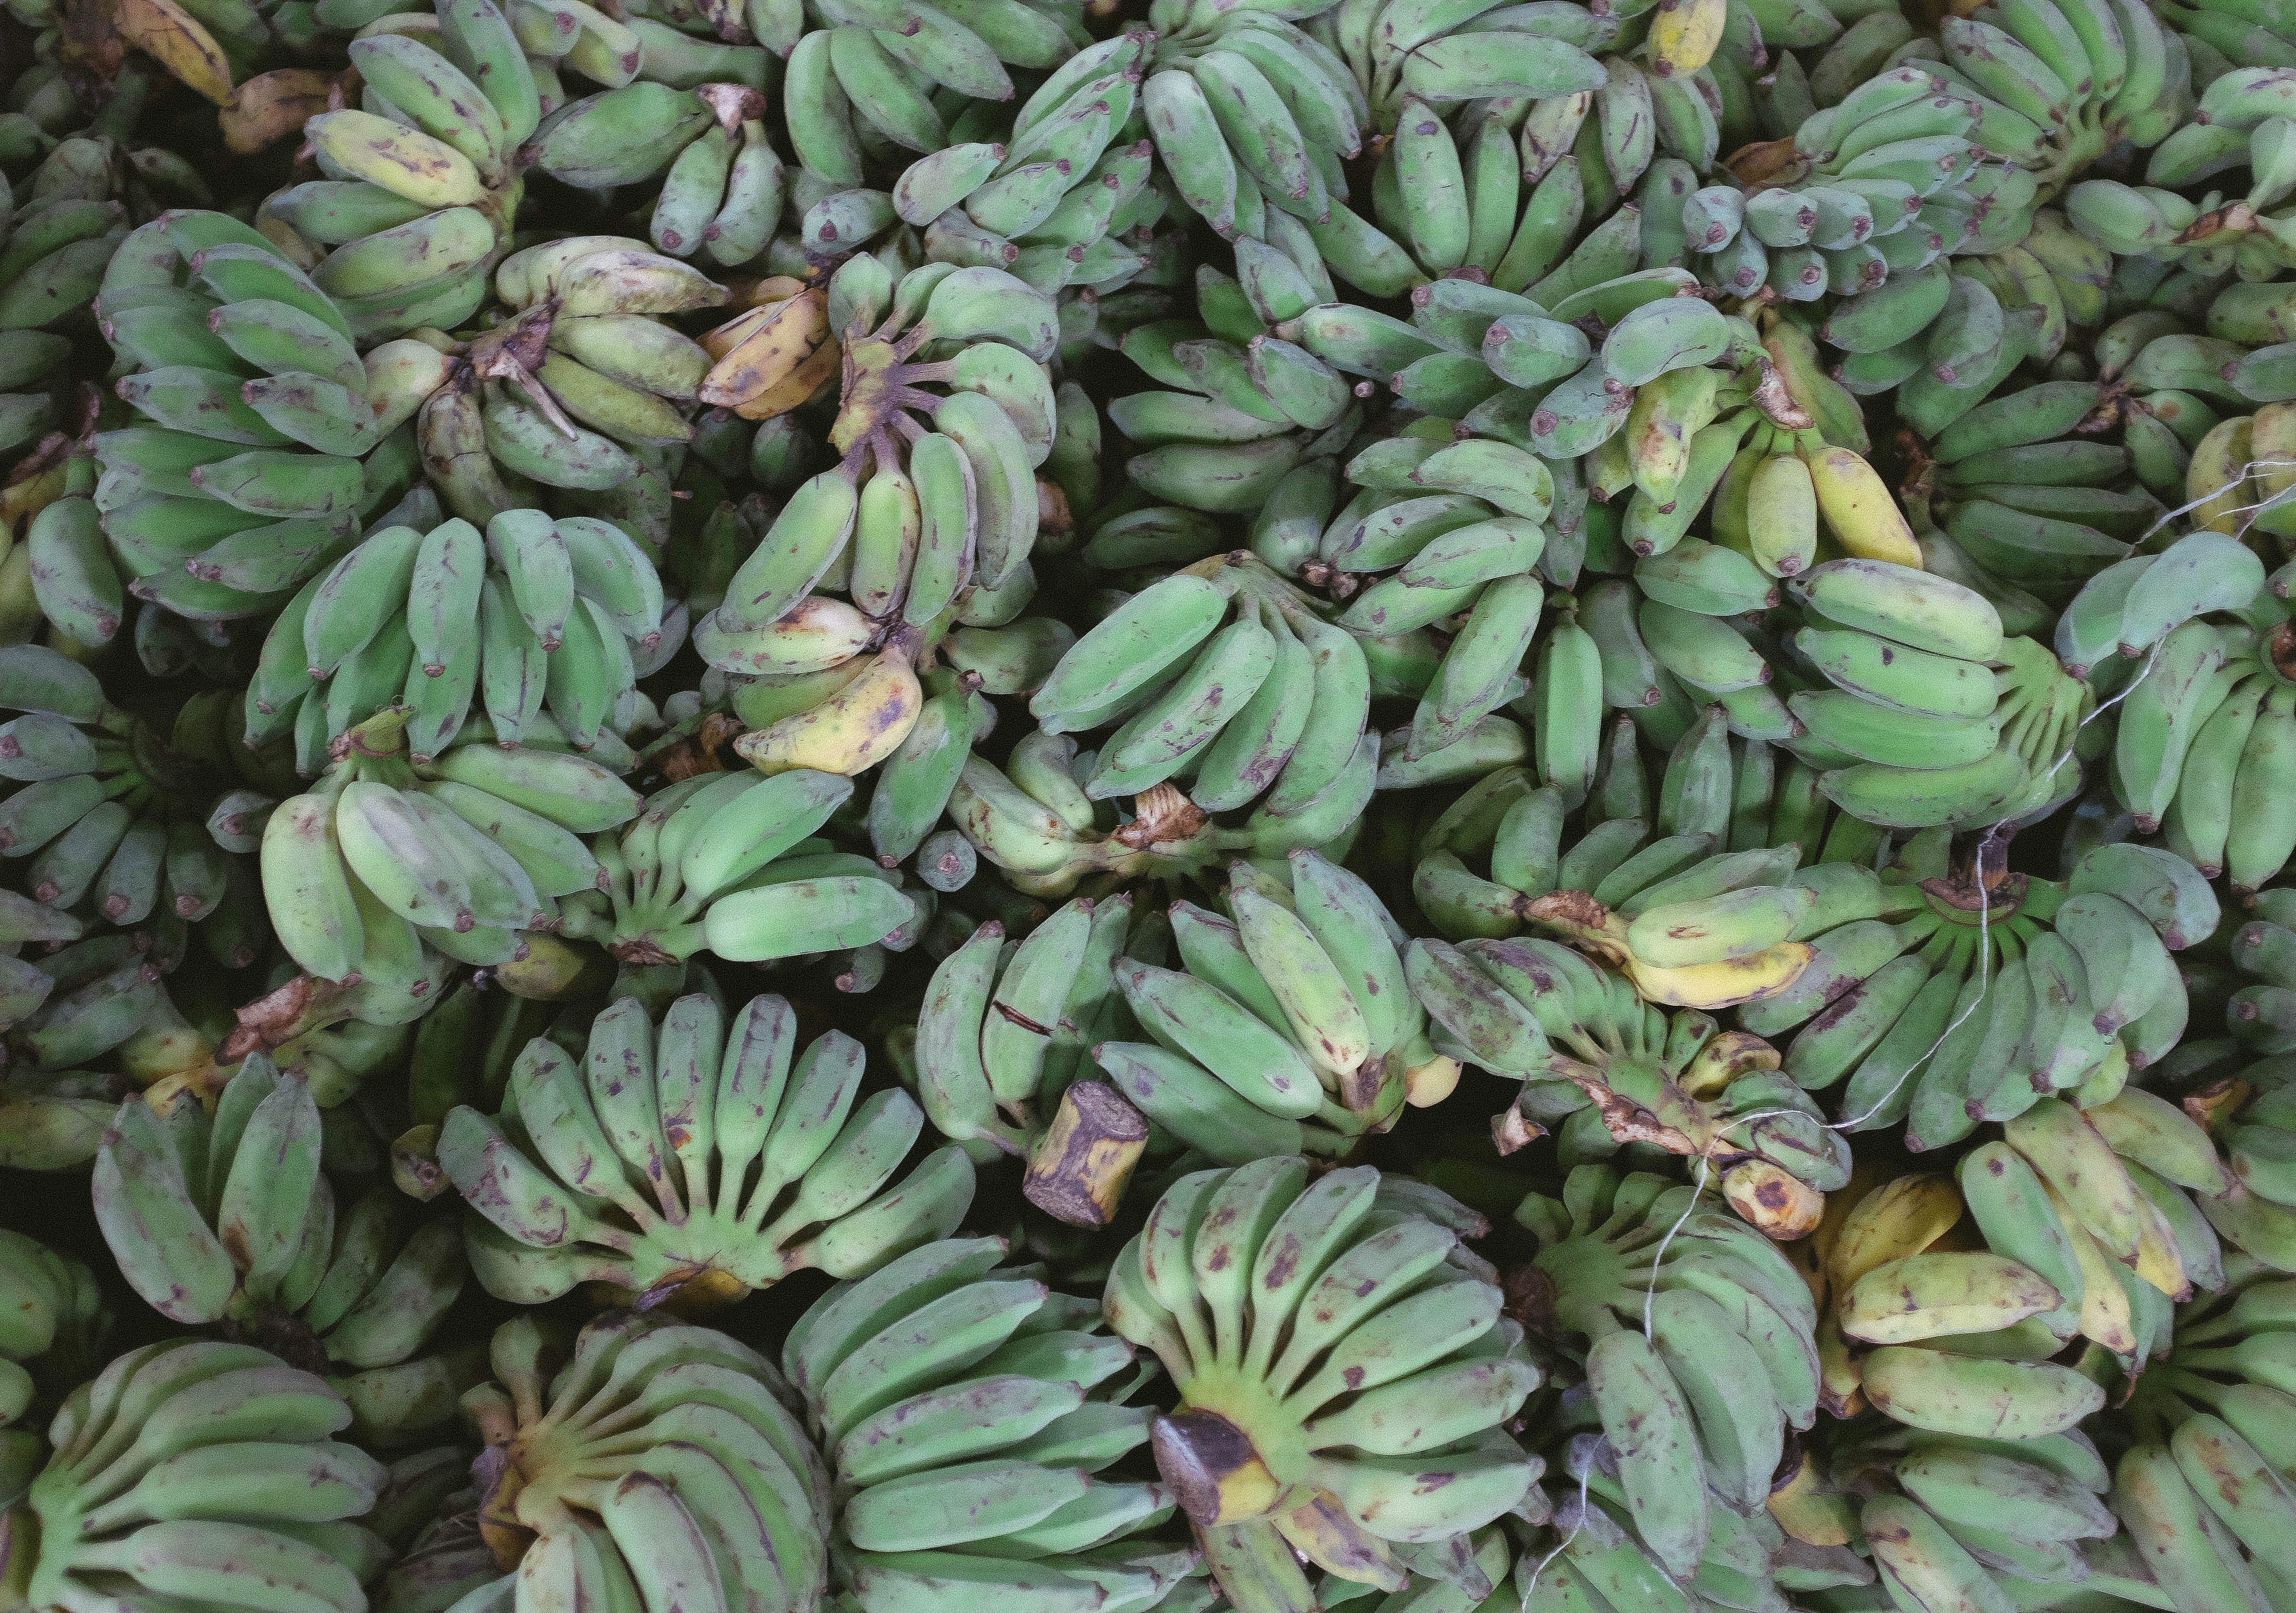 bunch of unriped bananas